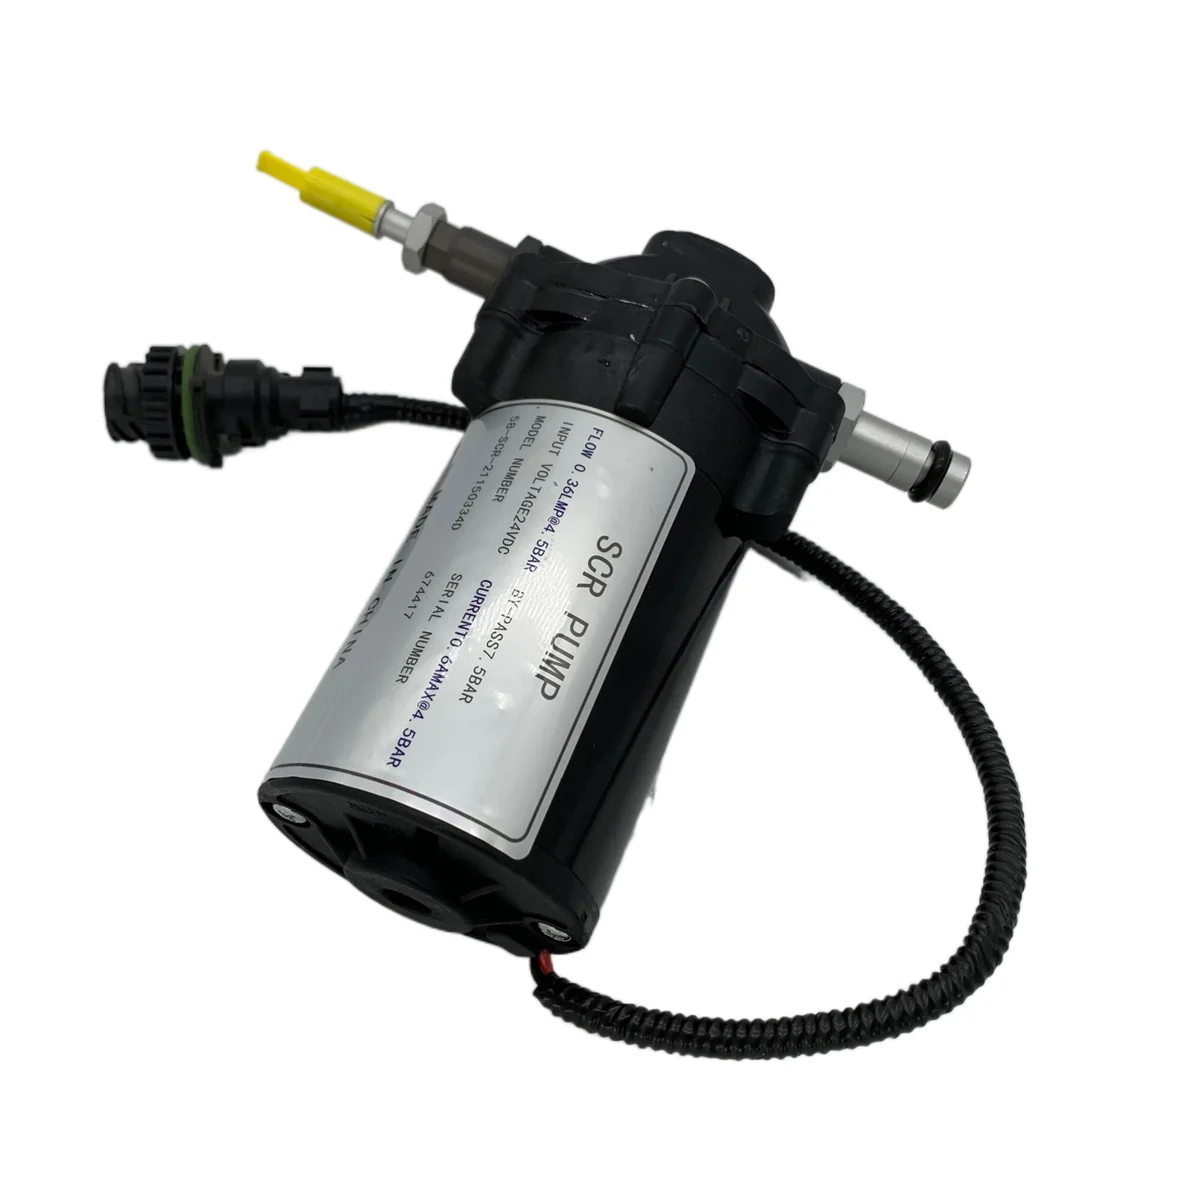 Dual Inlet Adaptor for AdBlue